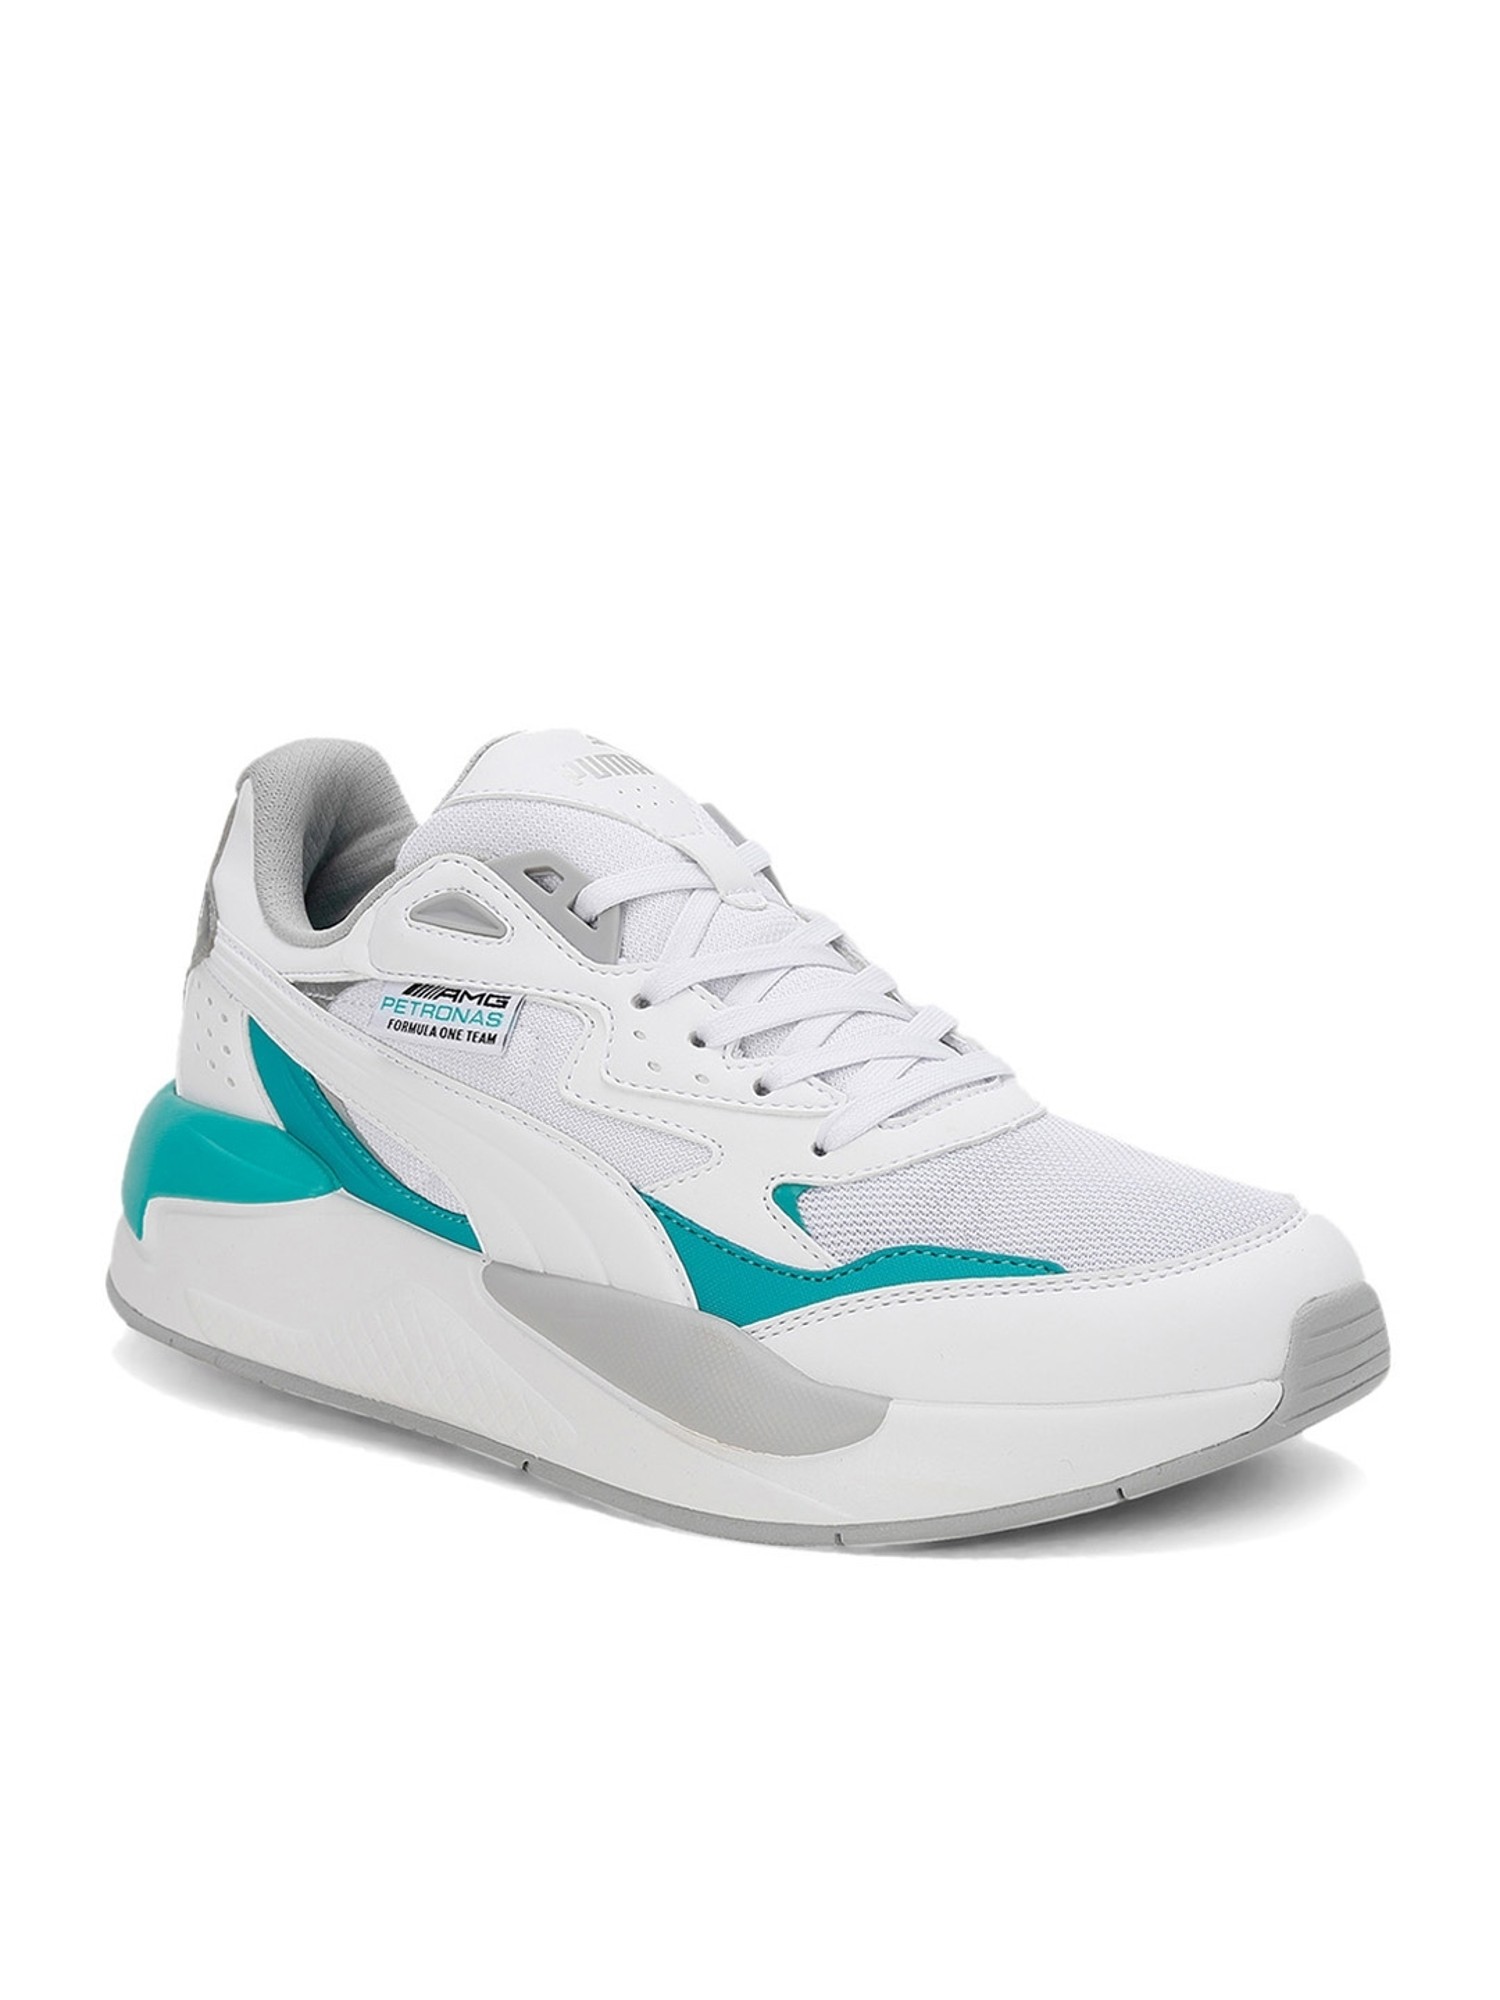 Buy Puma Unisex Adult Mercedes F1 X-Ray 2 Motorsport Shoes  Blanc/Argent/vert Turquoise Sneaker (30675501) at Amazon.in